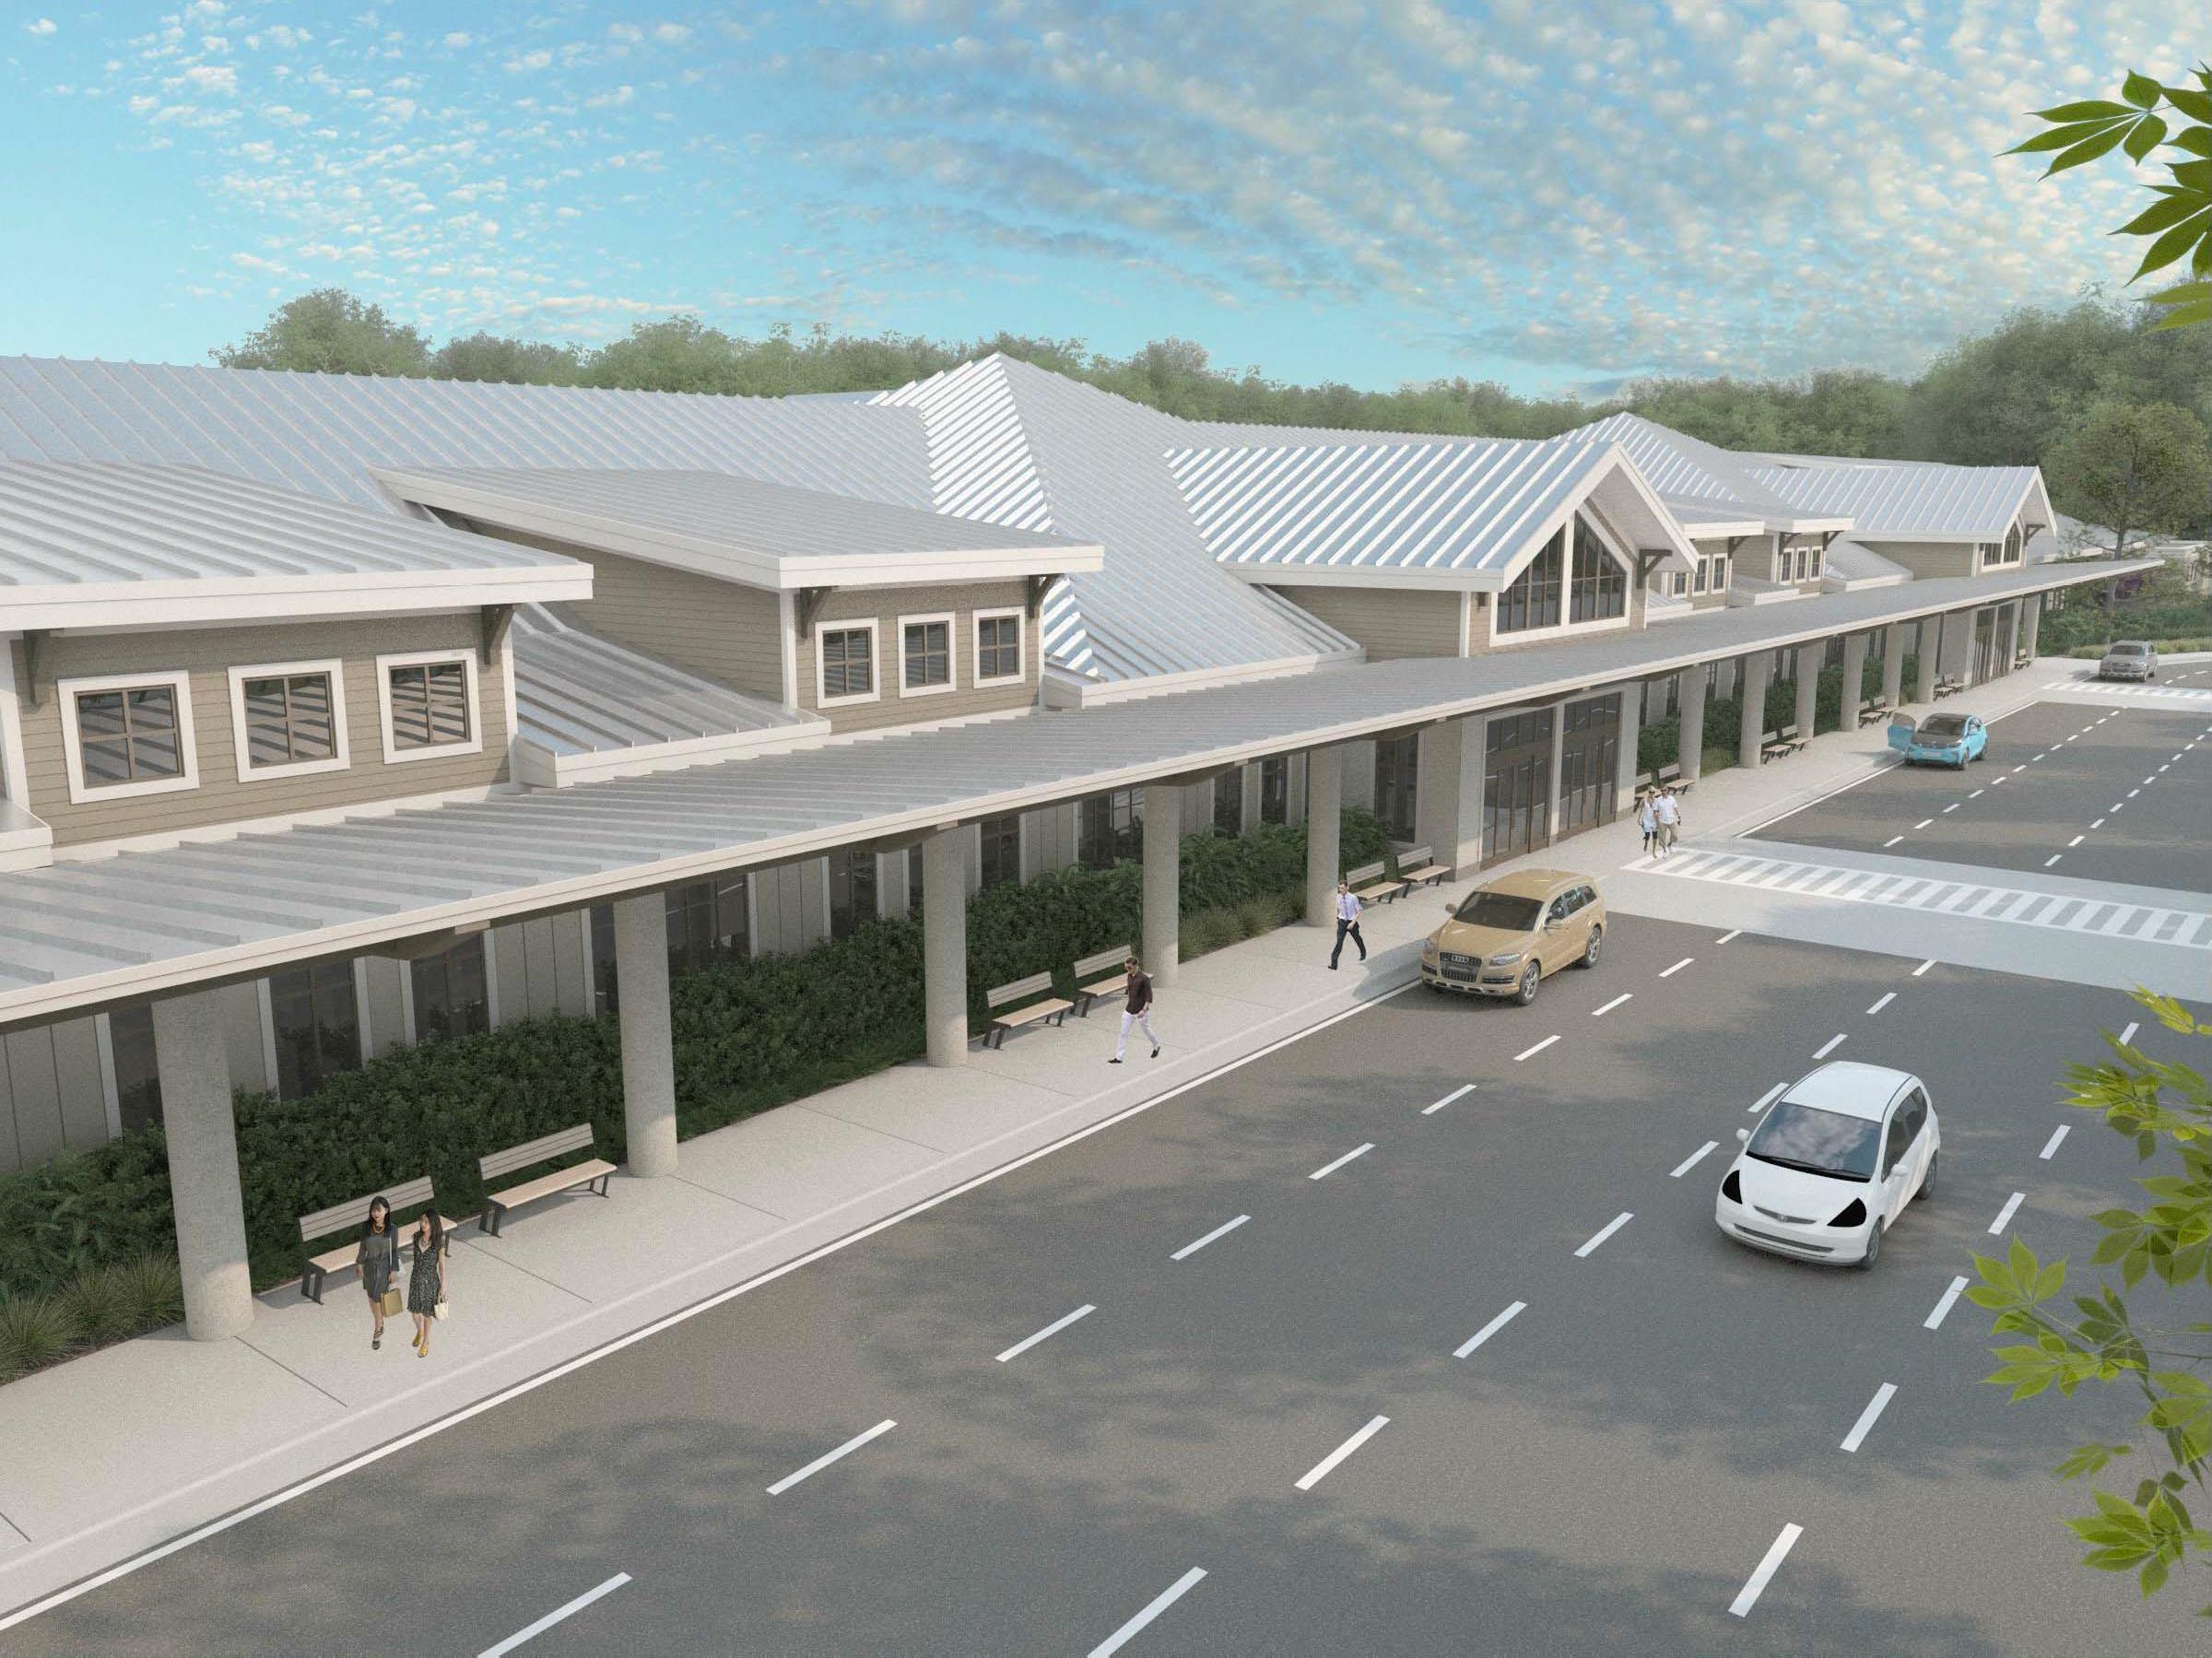 Hilton Head Island Airport Terminal Upgrade Receives $12 Million in State Funding